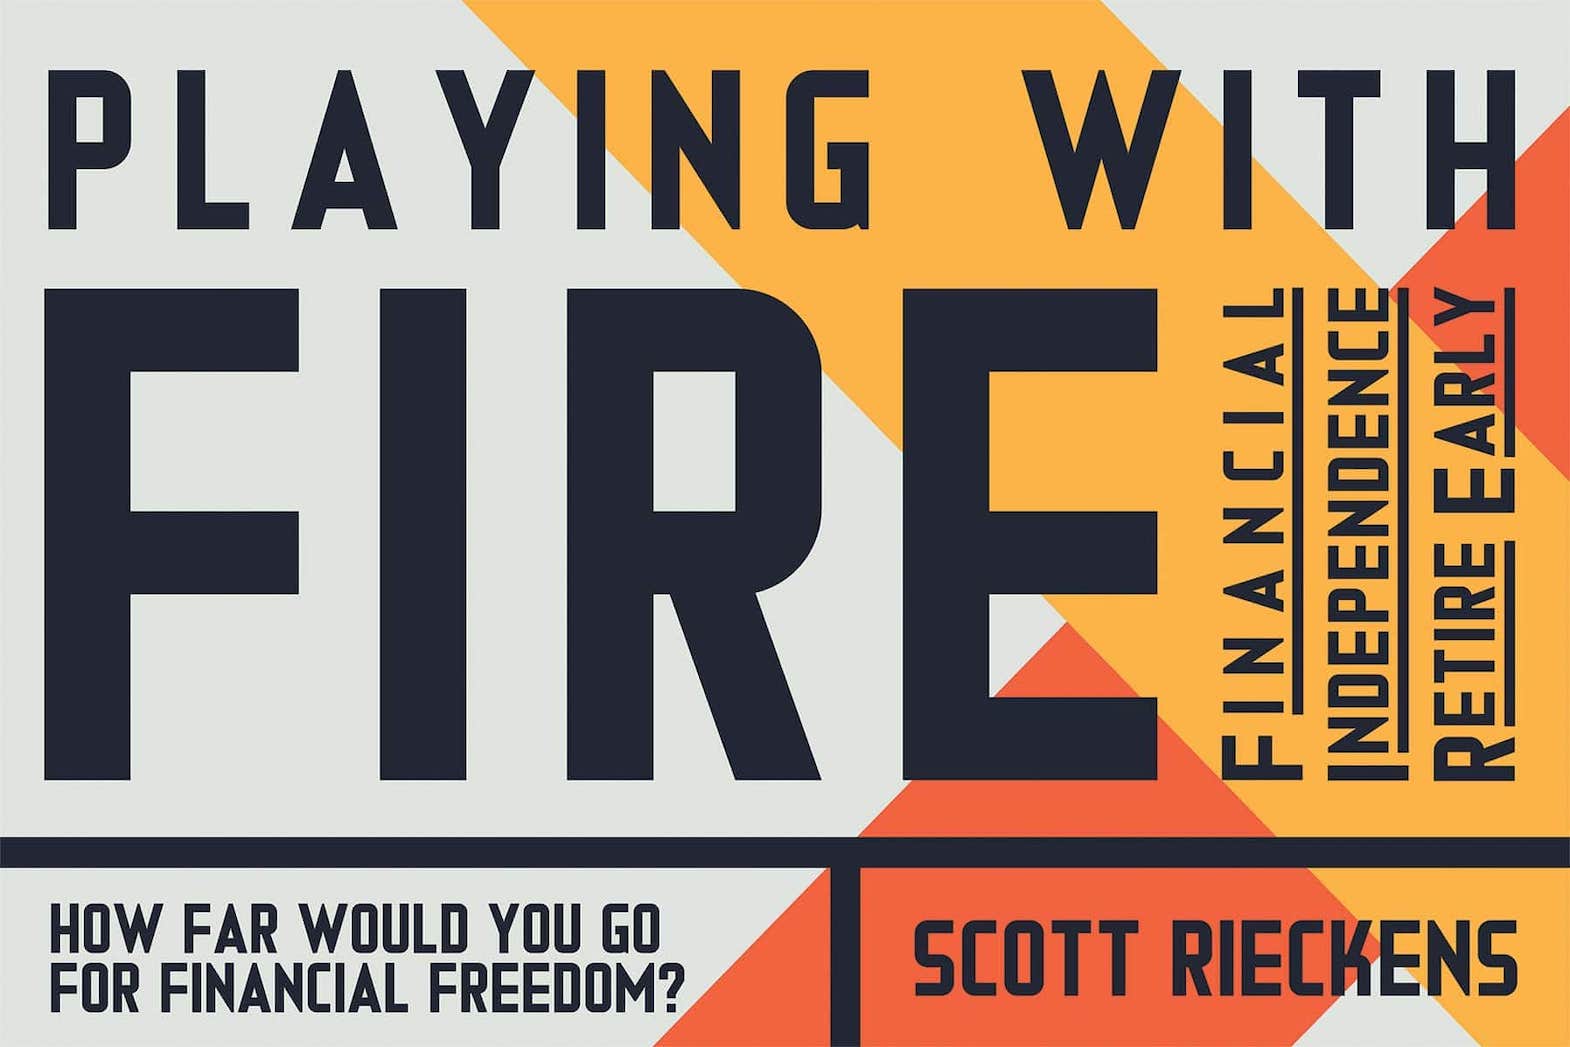 Playing With FIRE, by Scott Rieckens